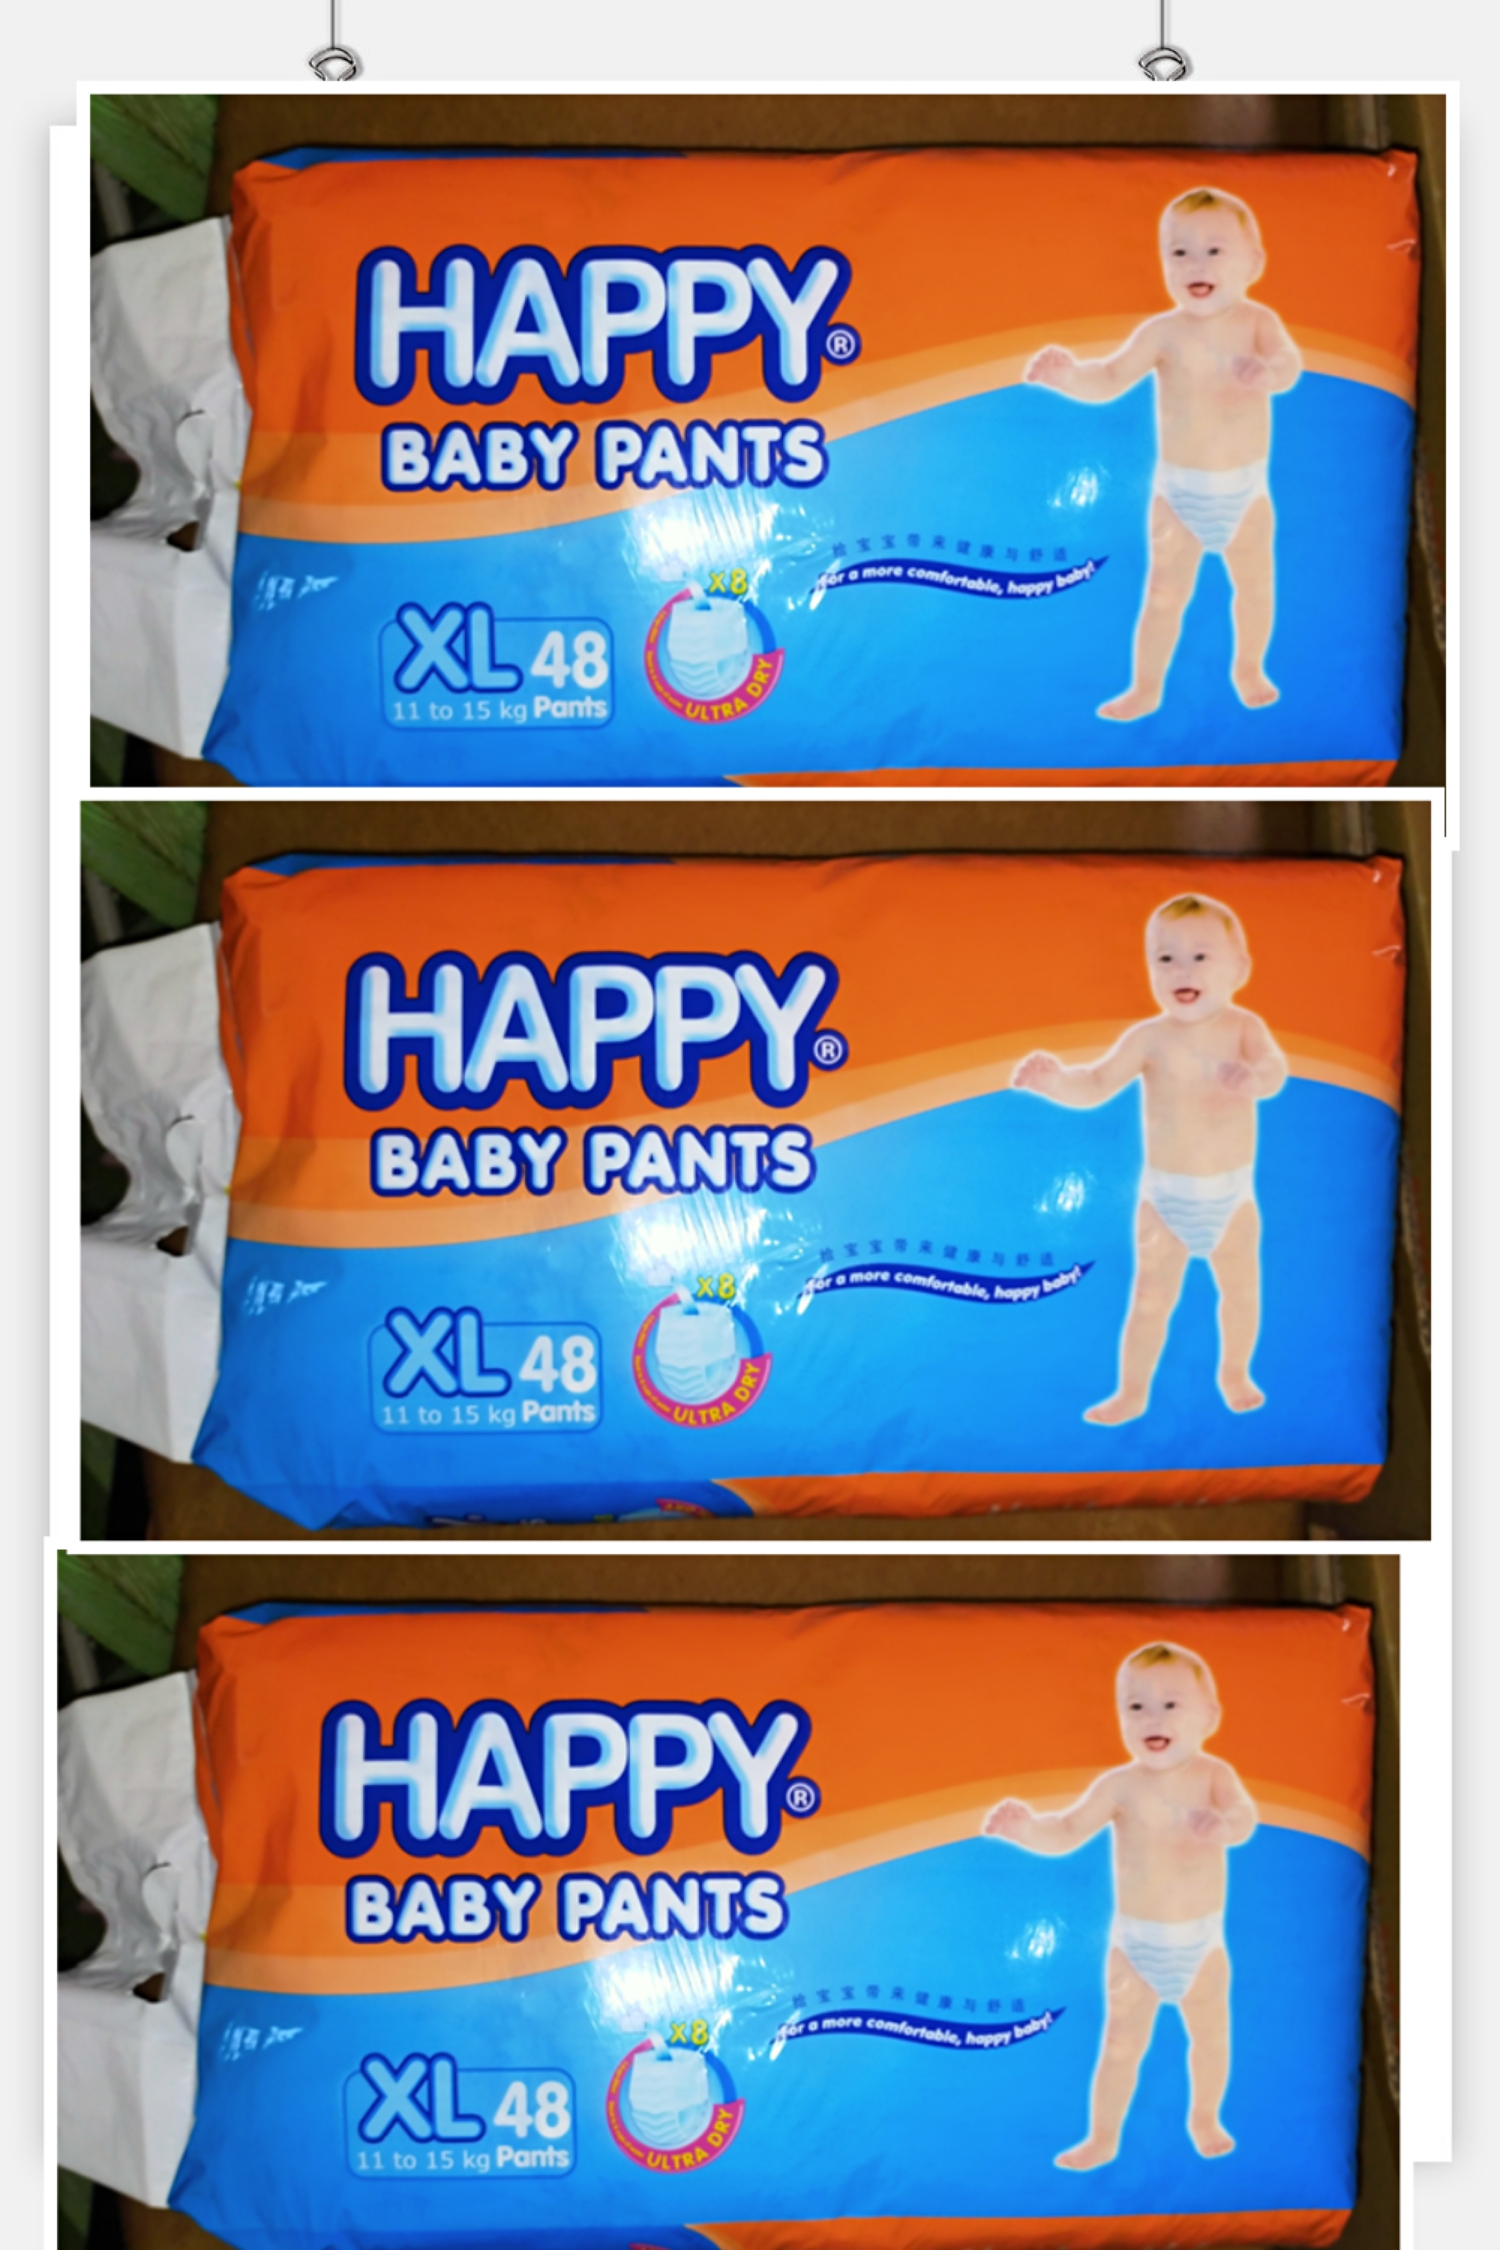 Buy Niine Baby Diaper Pants Extra Large(XL) Size (12-17 KG) (Pack of 2) 112  Pants for Overnight Protection with Rash Control Online at Best Prices in  India - JioMart.